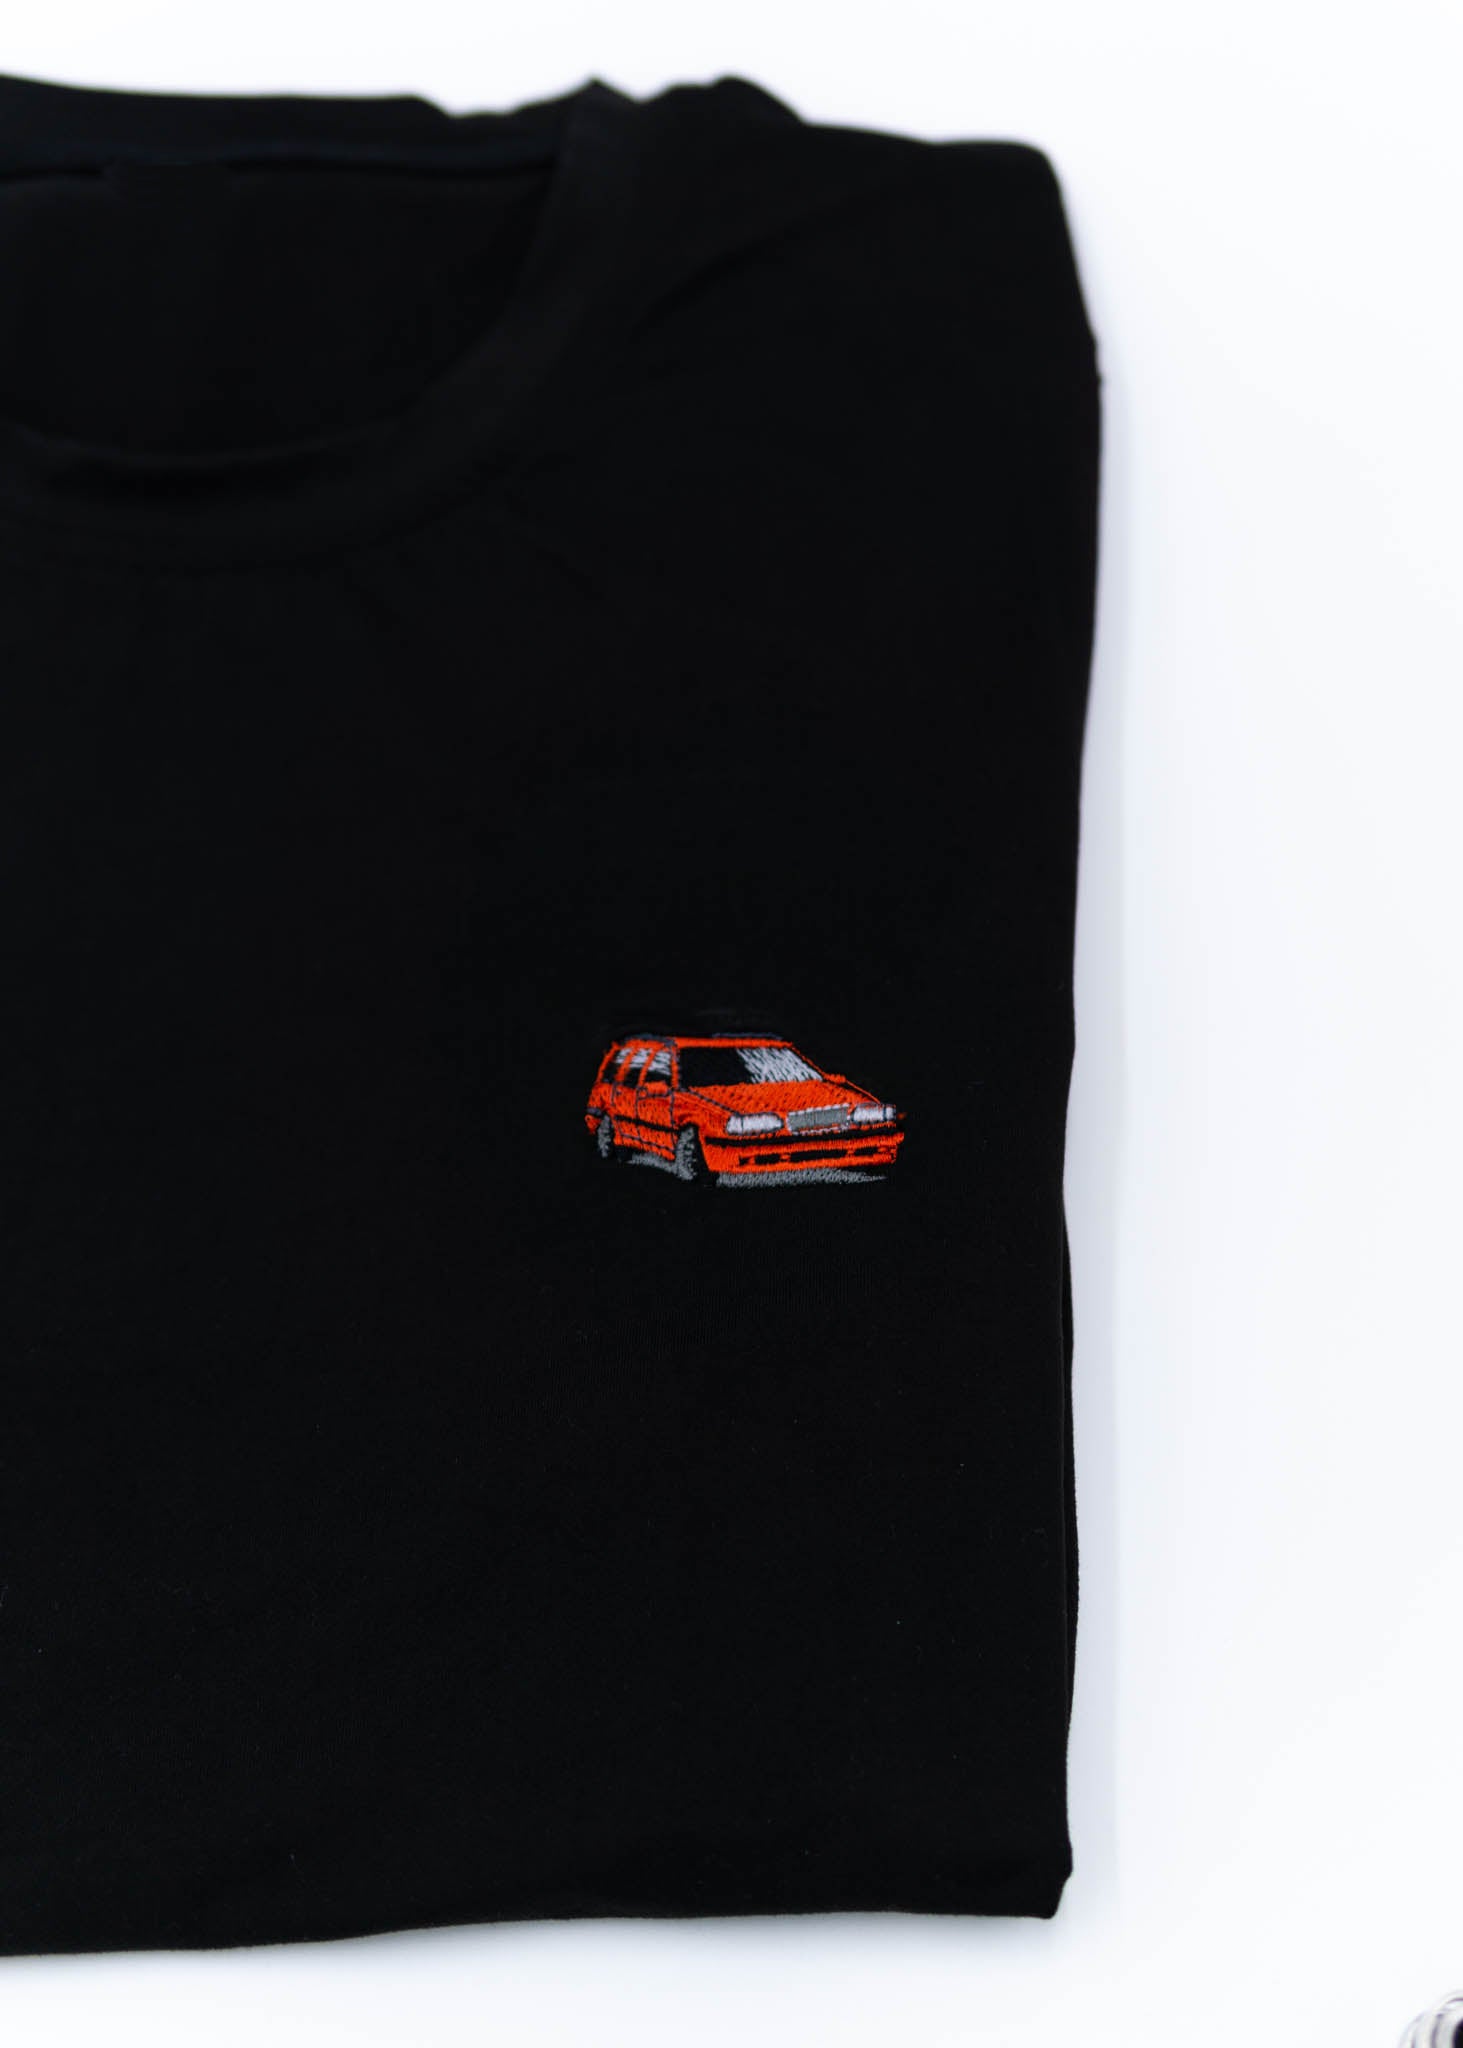 A black Volvo t-shirt for men. Photo is a close up view of the shirt with an embroidered red 850R. Fabric composition is a polyester, and cotton mix. The material is very soft, stretchy, non-transparent. The style of this shirt is short sleeve, with a crewneck neckline.